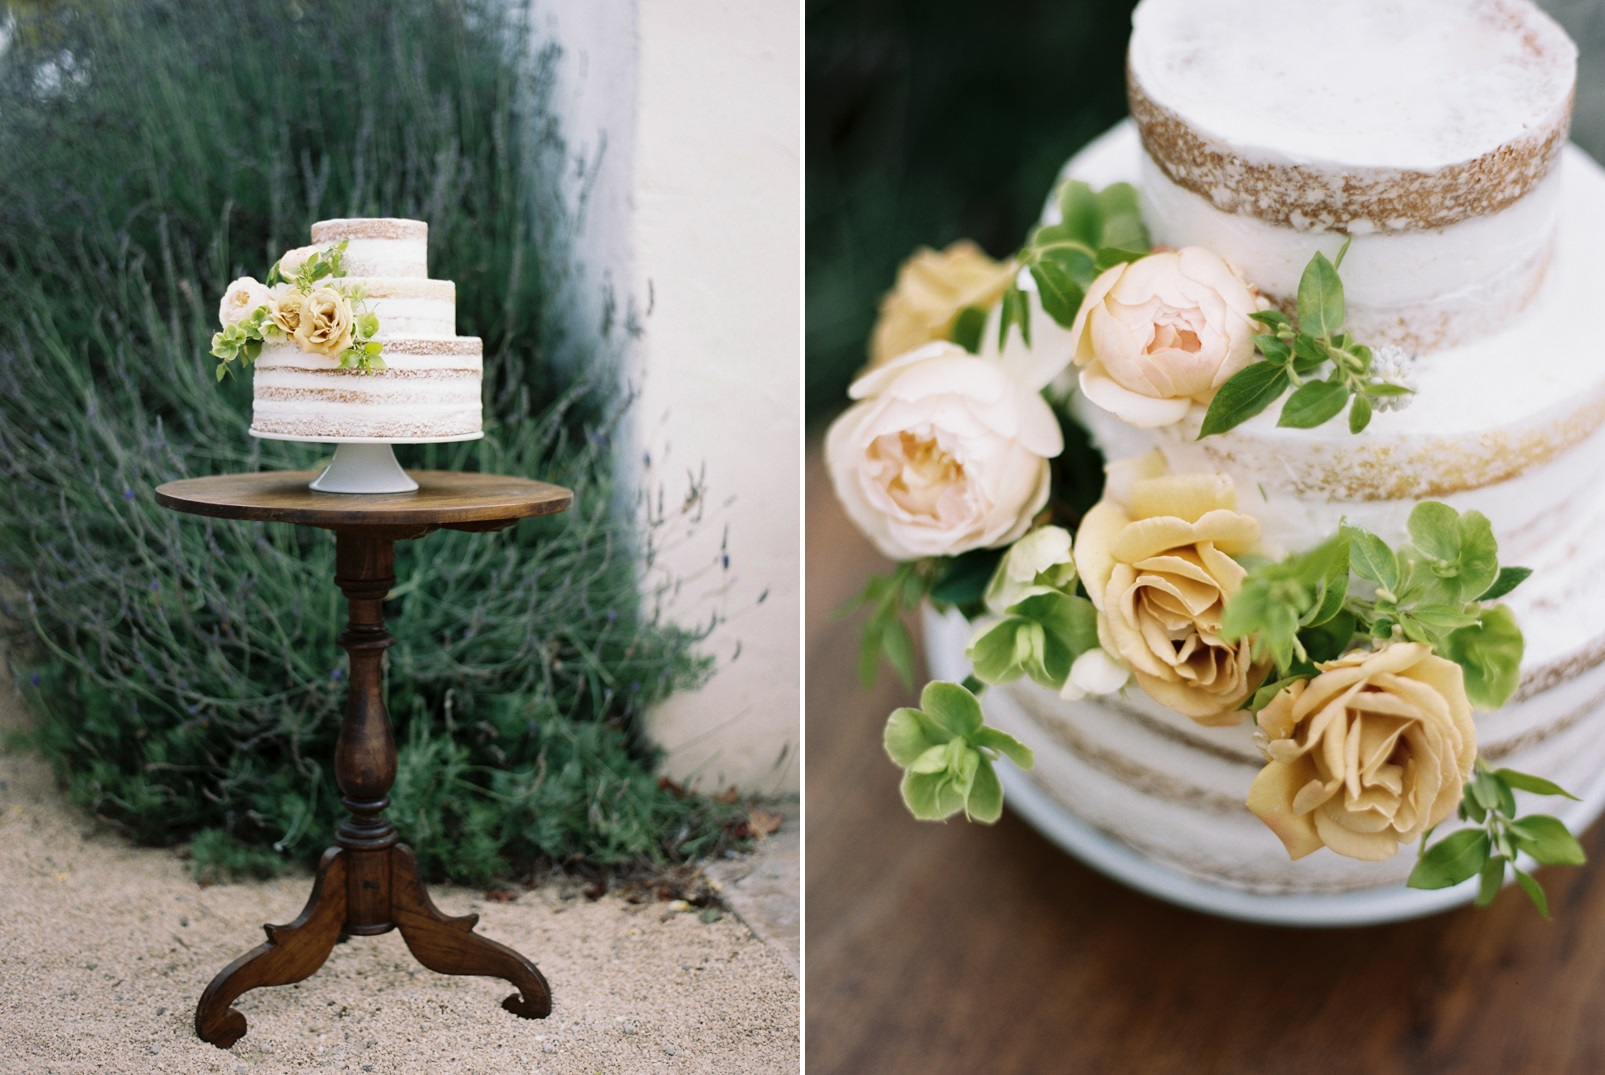 Naked Wedding Cake - Dreamy Garden Wedding Inspiration with a Hint of Provence